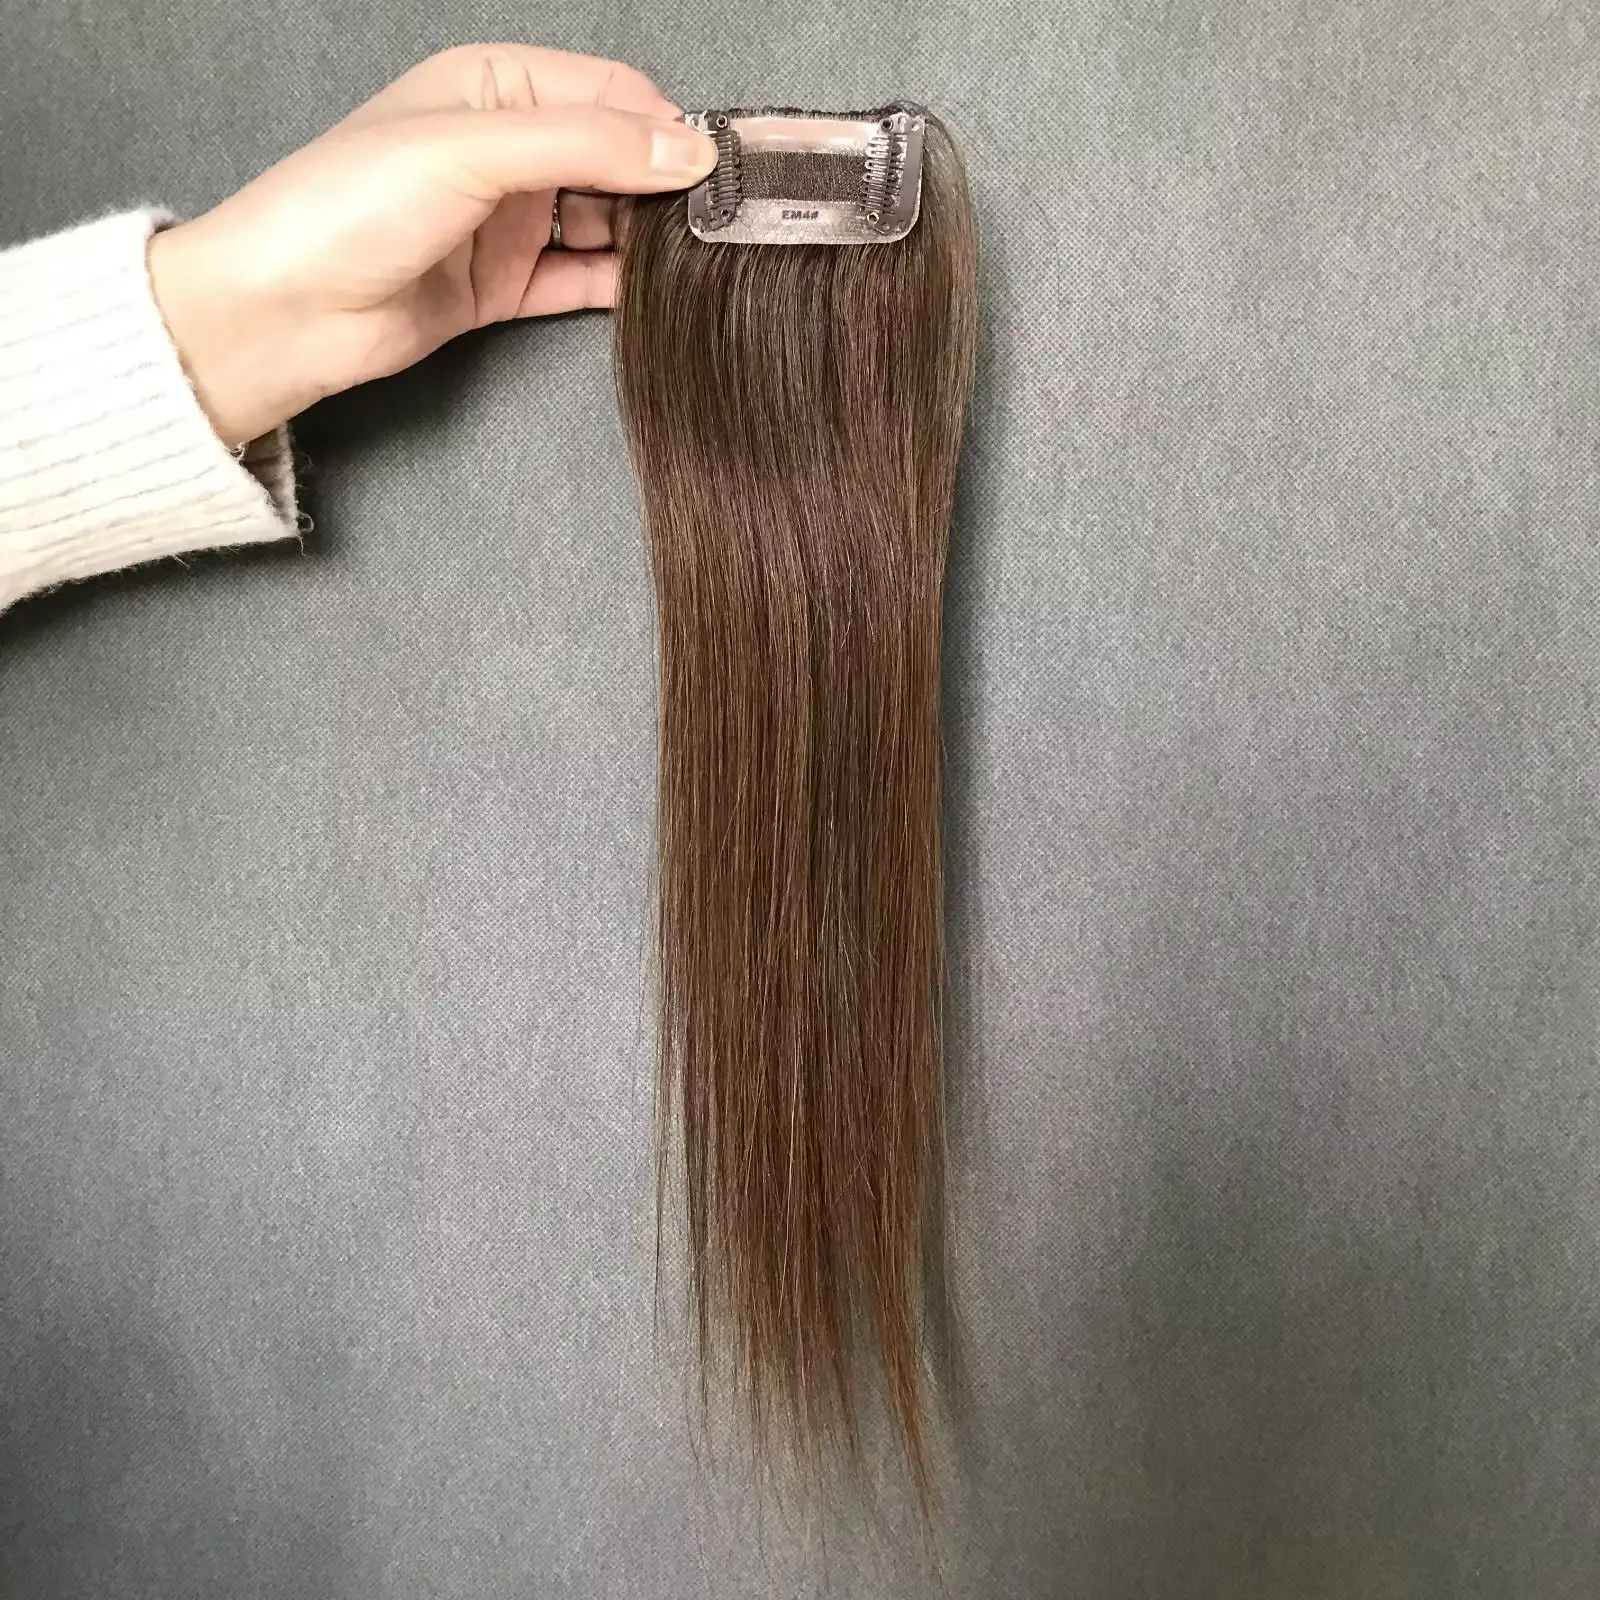 100% Remy Human Hair Extensions Clip In for Thinning Hair extension Short style add Women Hair Volume Natural Straight extension